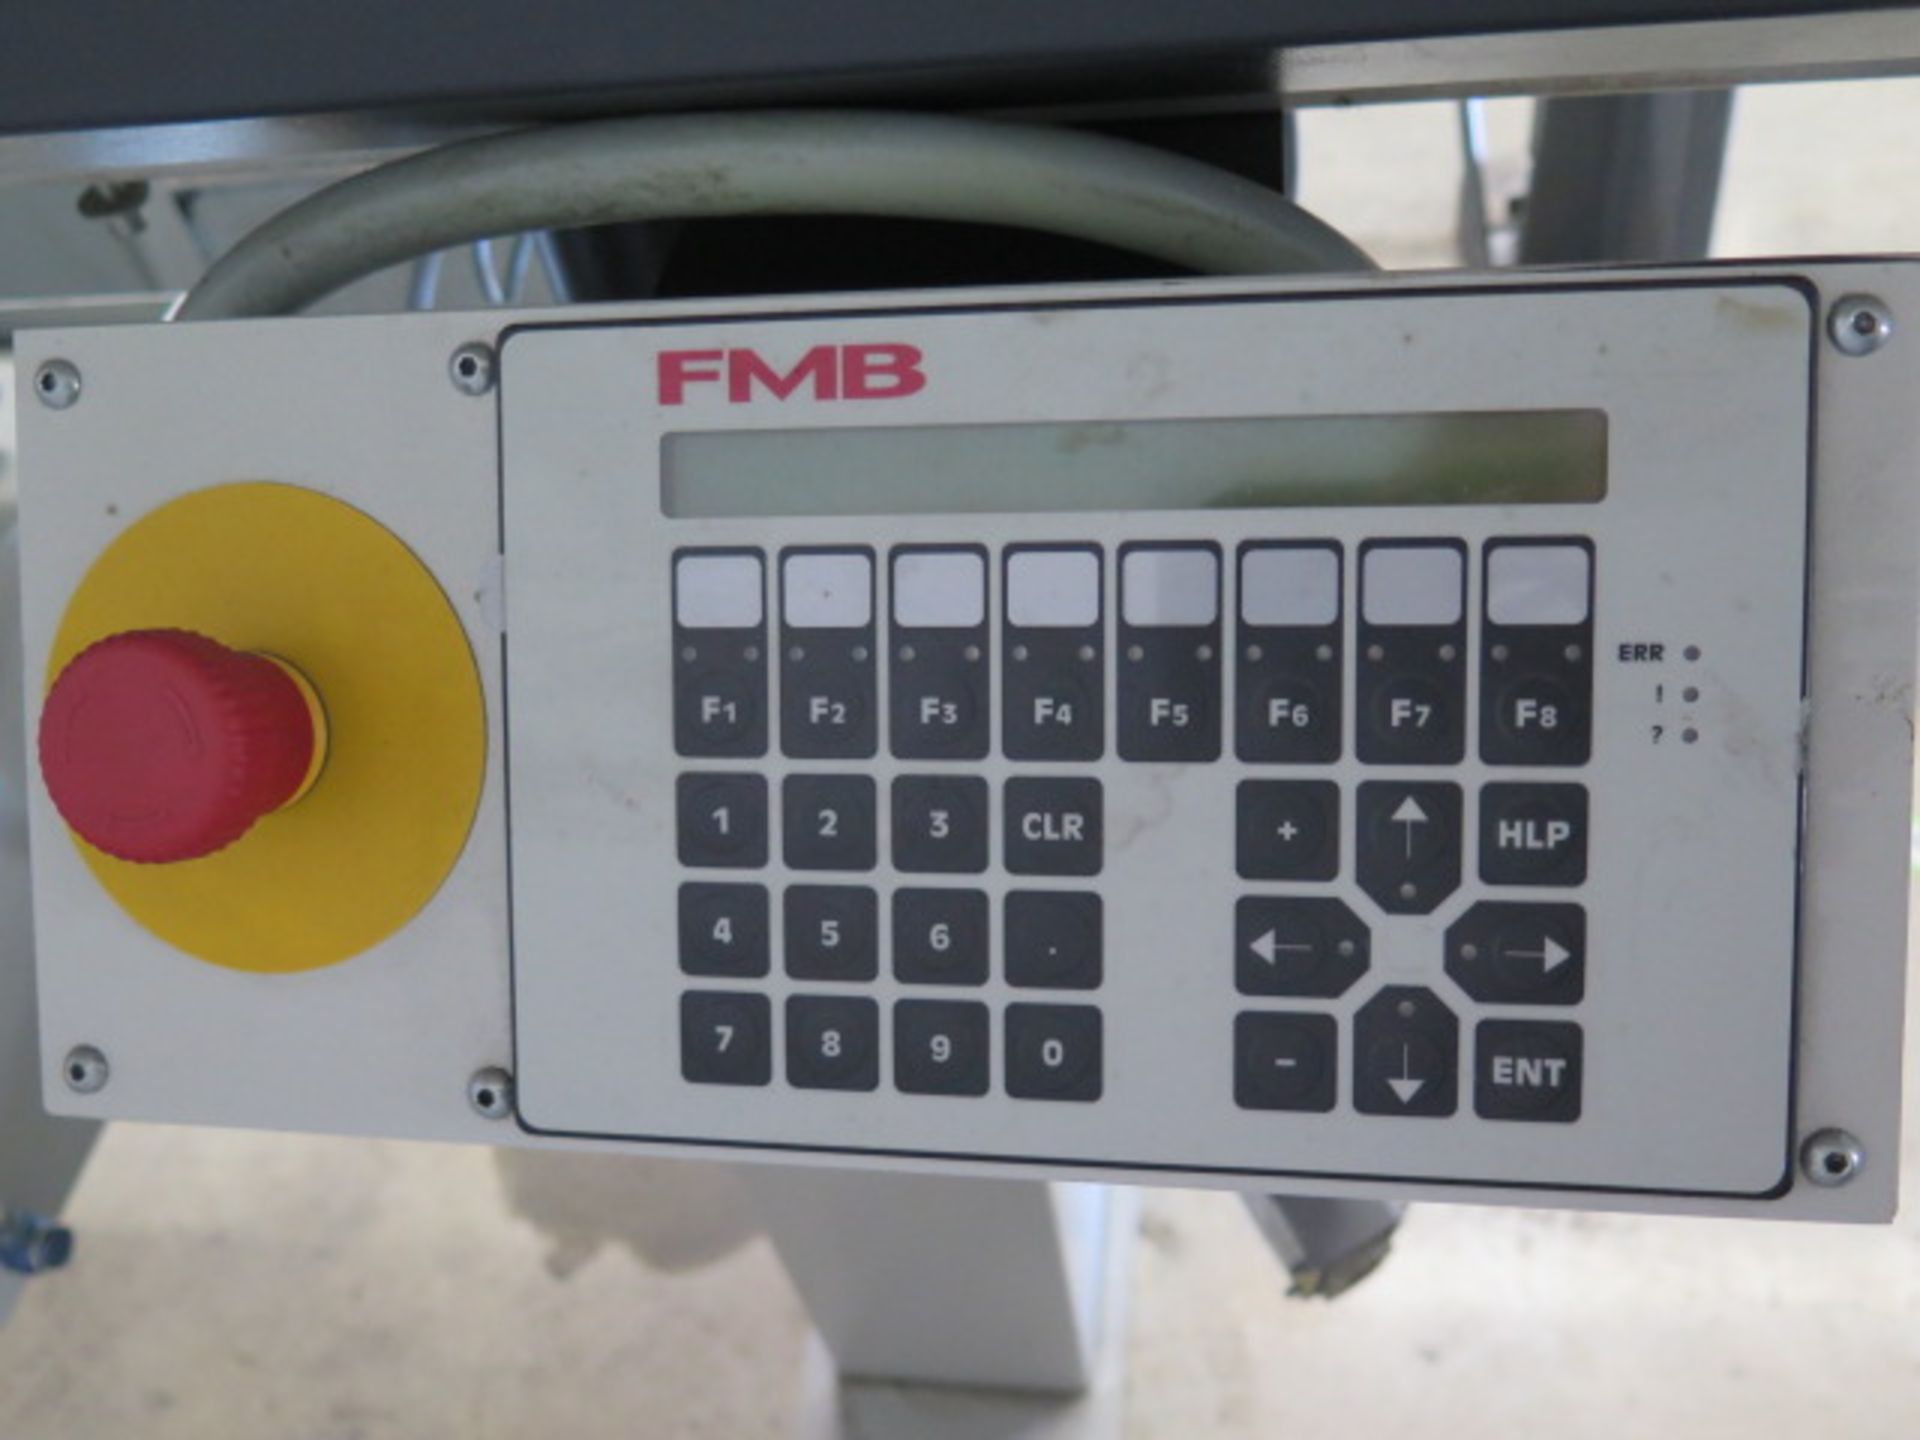 FMB / Edge Technologies "Minimag 18" Automatic Bar Loader / Feeder s/n 36-161505 SOLD AS IS - Image 4 of 9